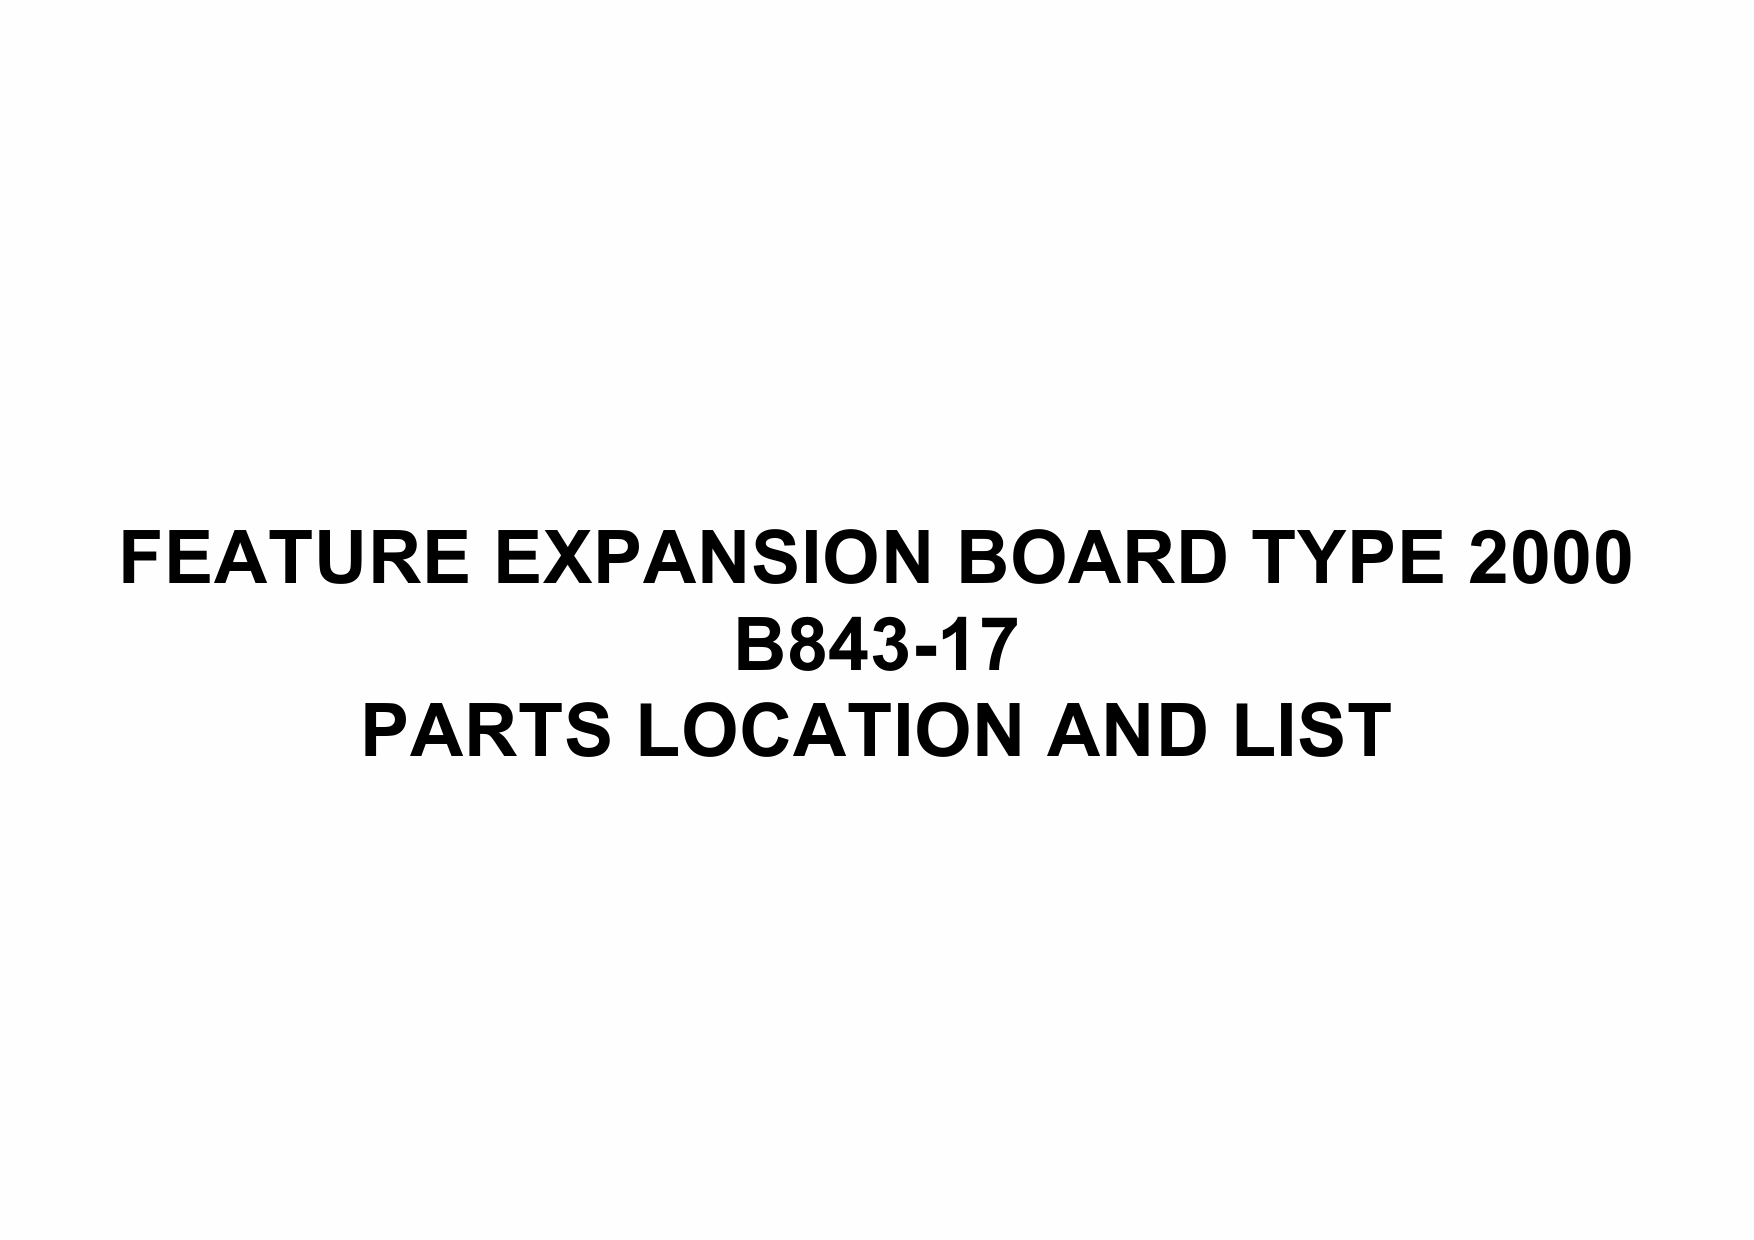 RICOH Options B843 FEATURE-EXPANSION-BOARD-TYPE-2000 Parts Catalog PDF download-1